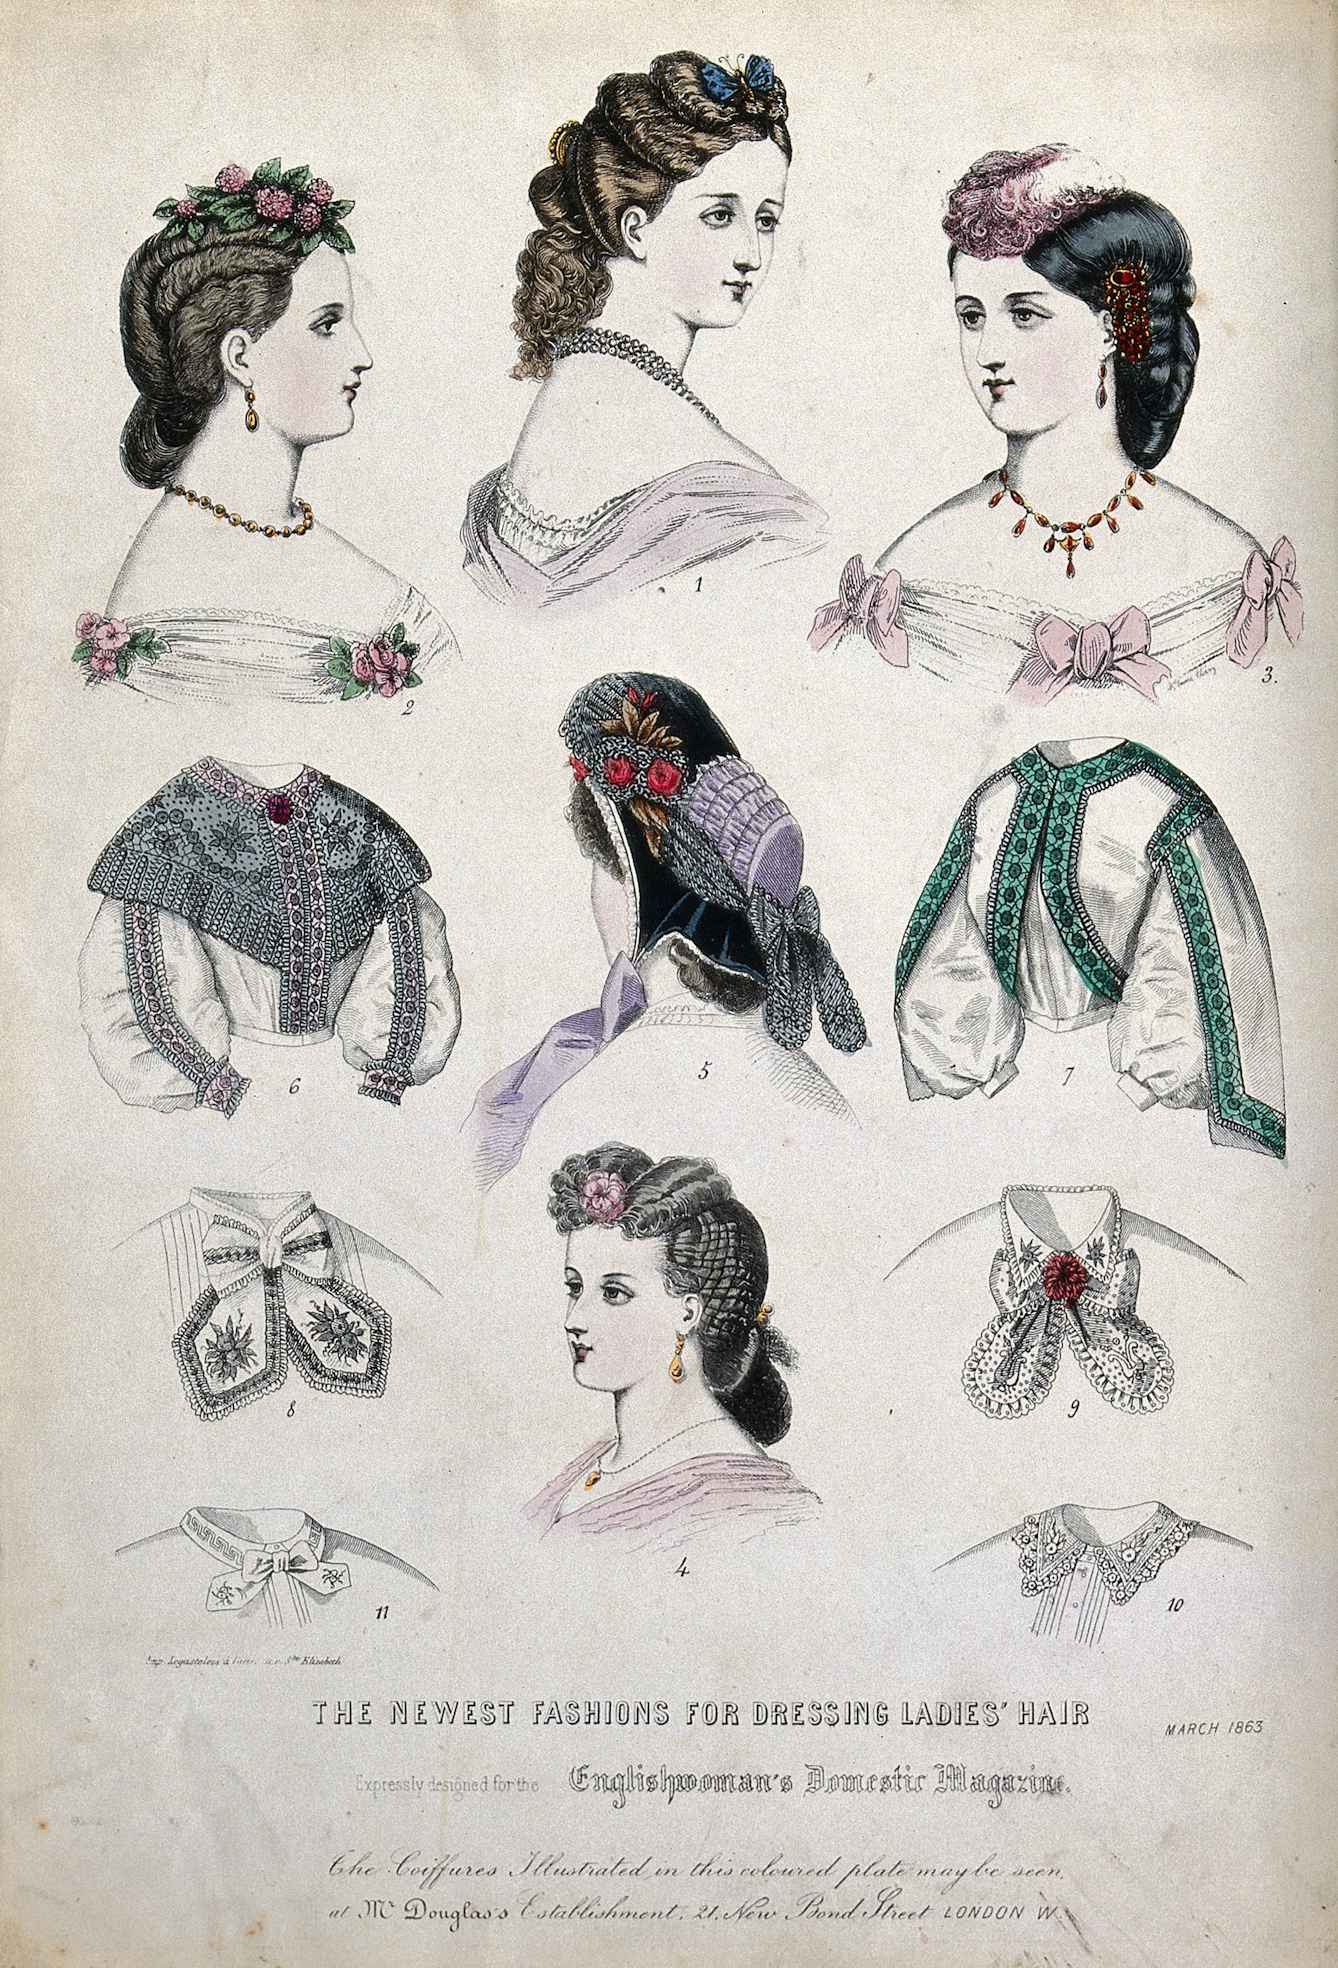 Colour illustration showing the  heads and shoulders of five women wearing their hair dressed with flowers, butterflies, feathers, jewellery and a hat. The image also shows different bodice and collar designs, and hairstyles.